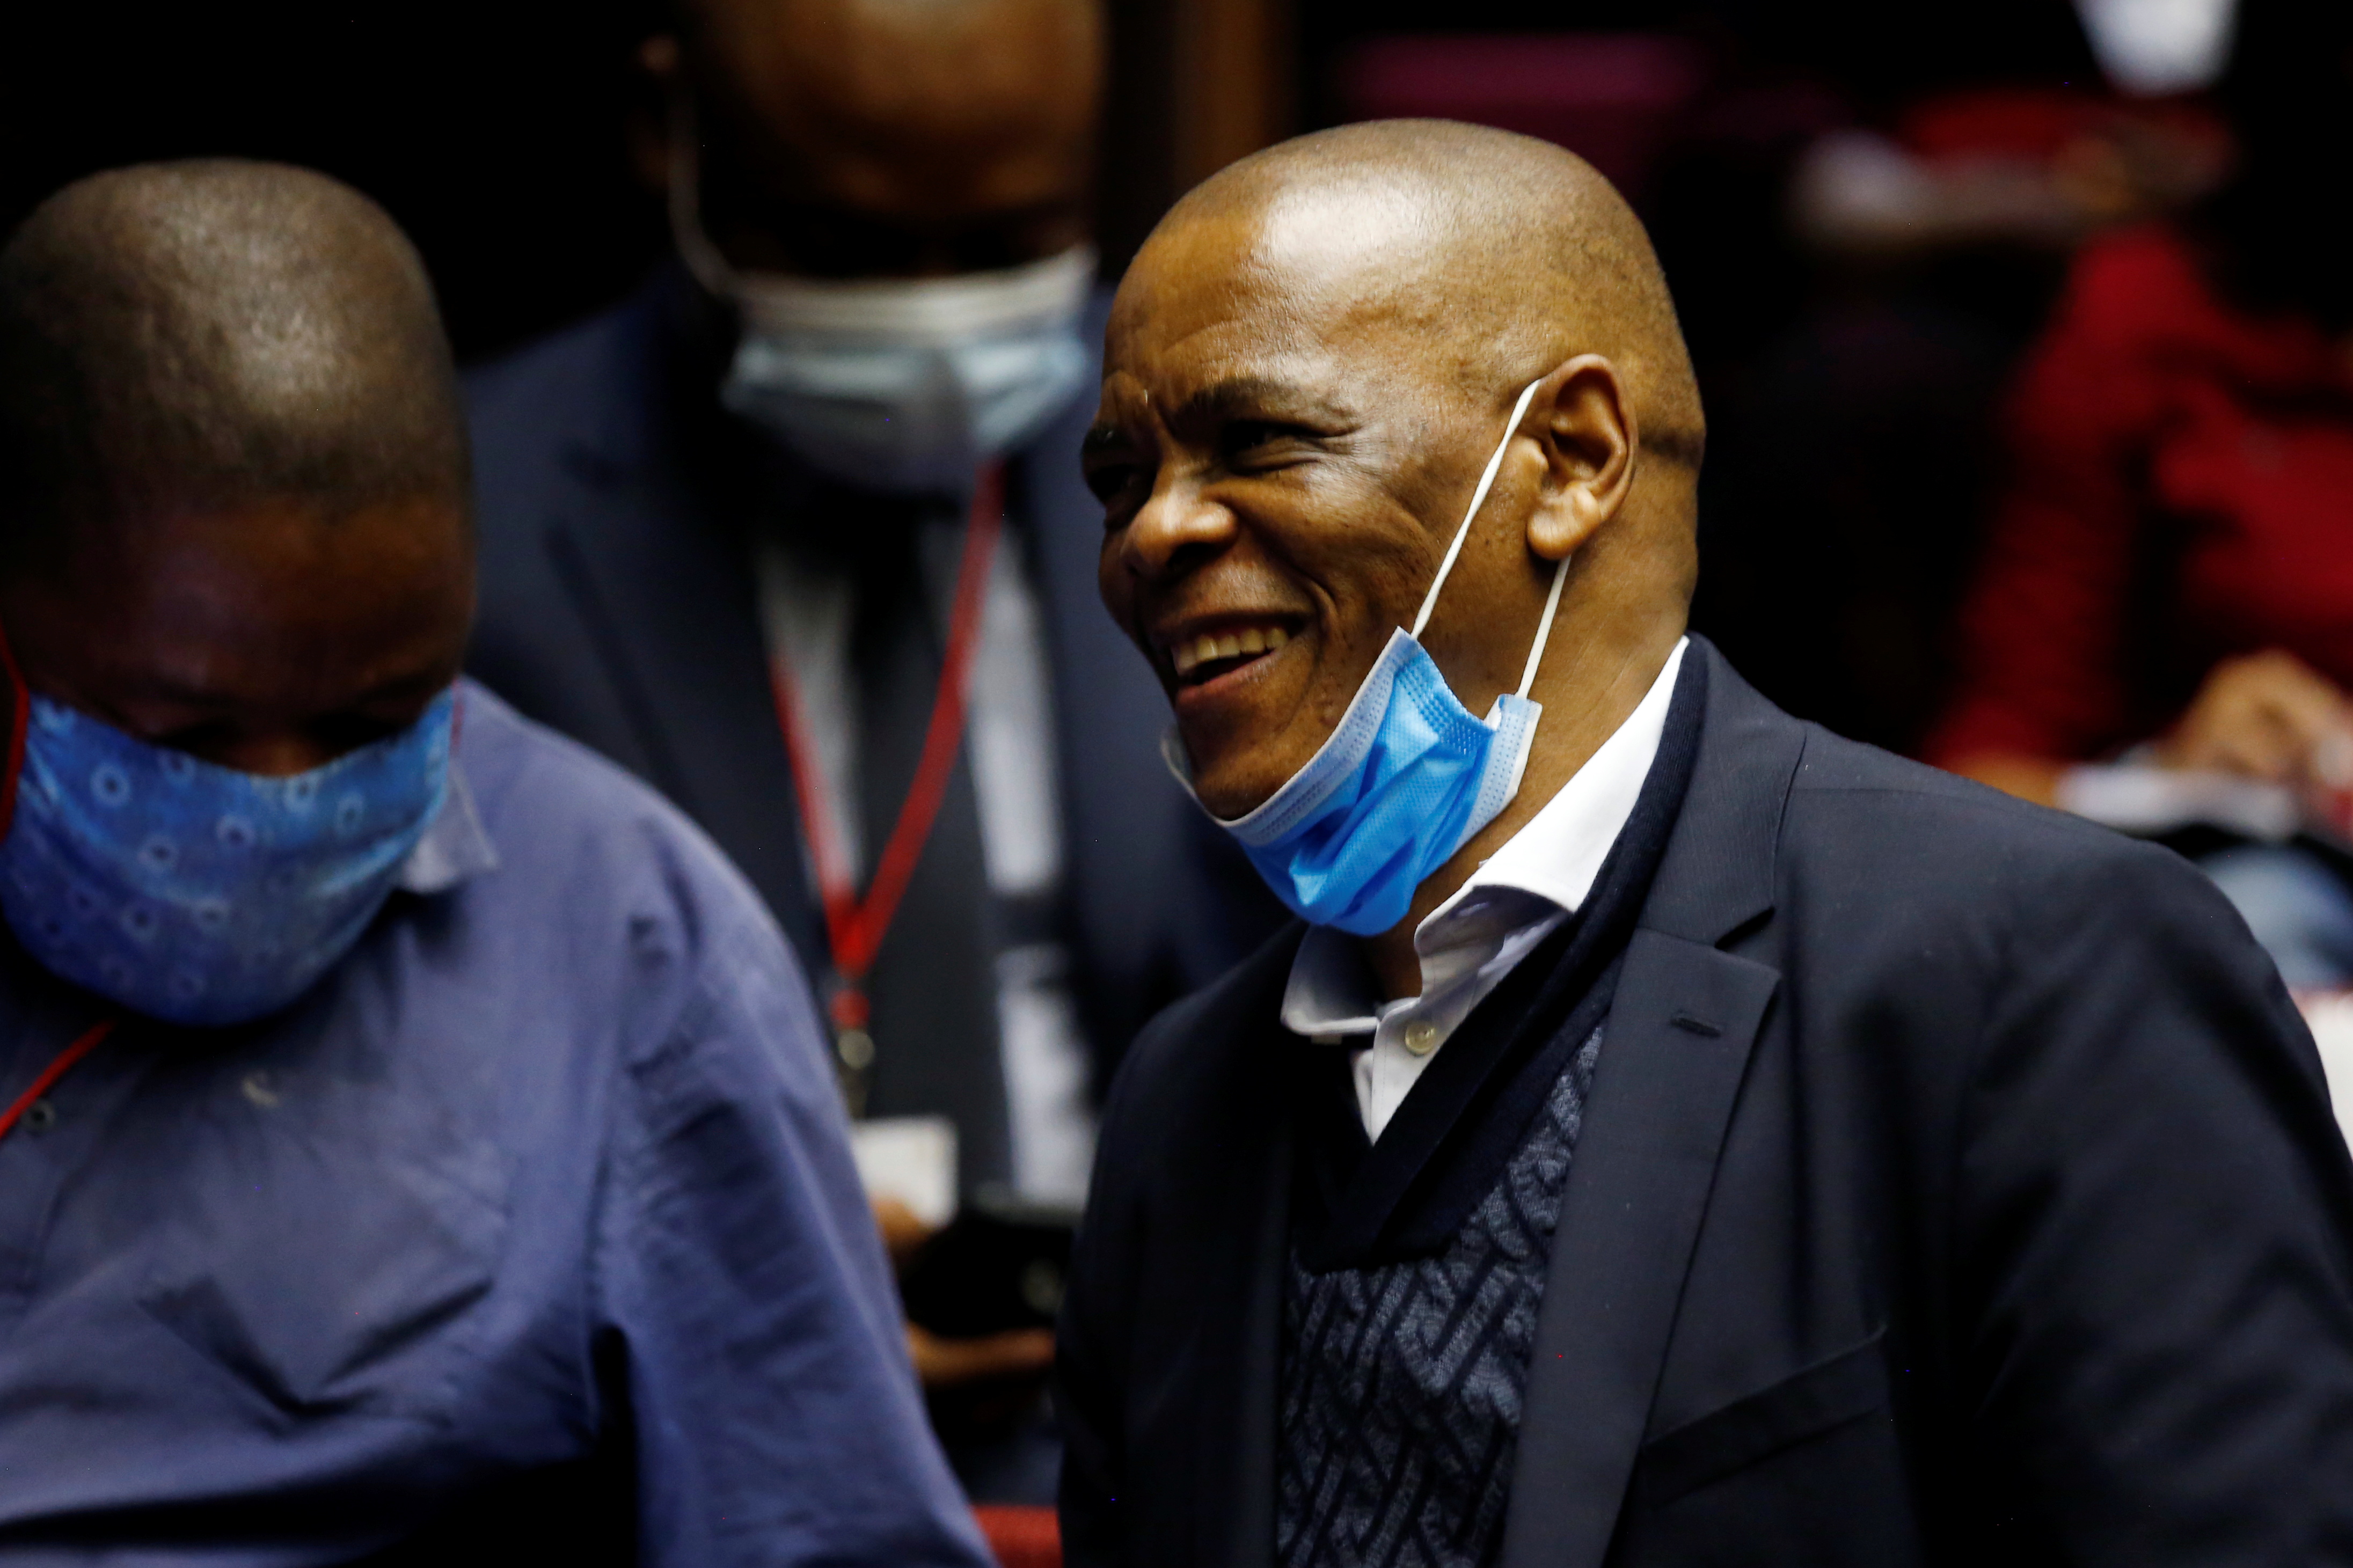 Suspended African National Congress (ANC) secretary general Ace Magashule arrives in court